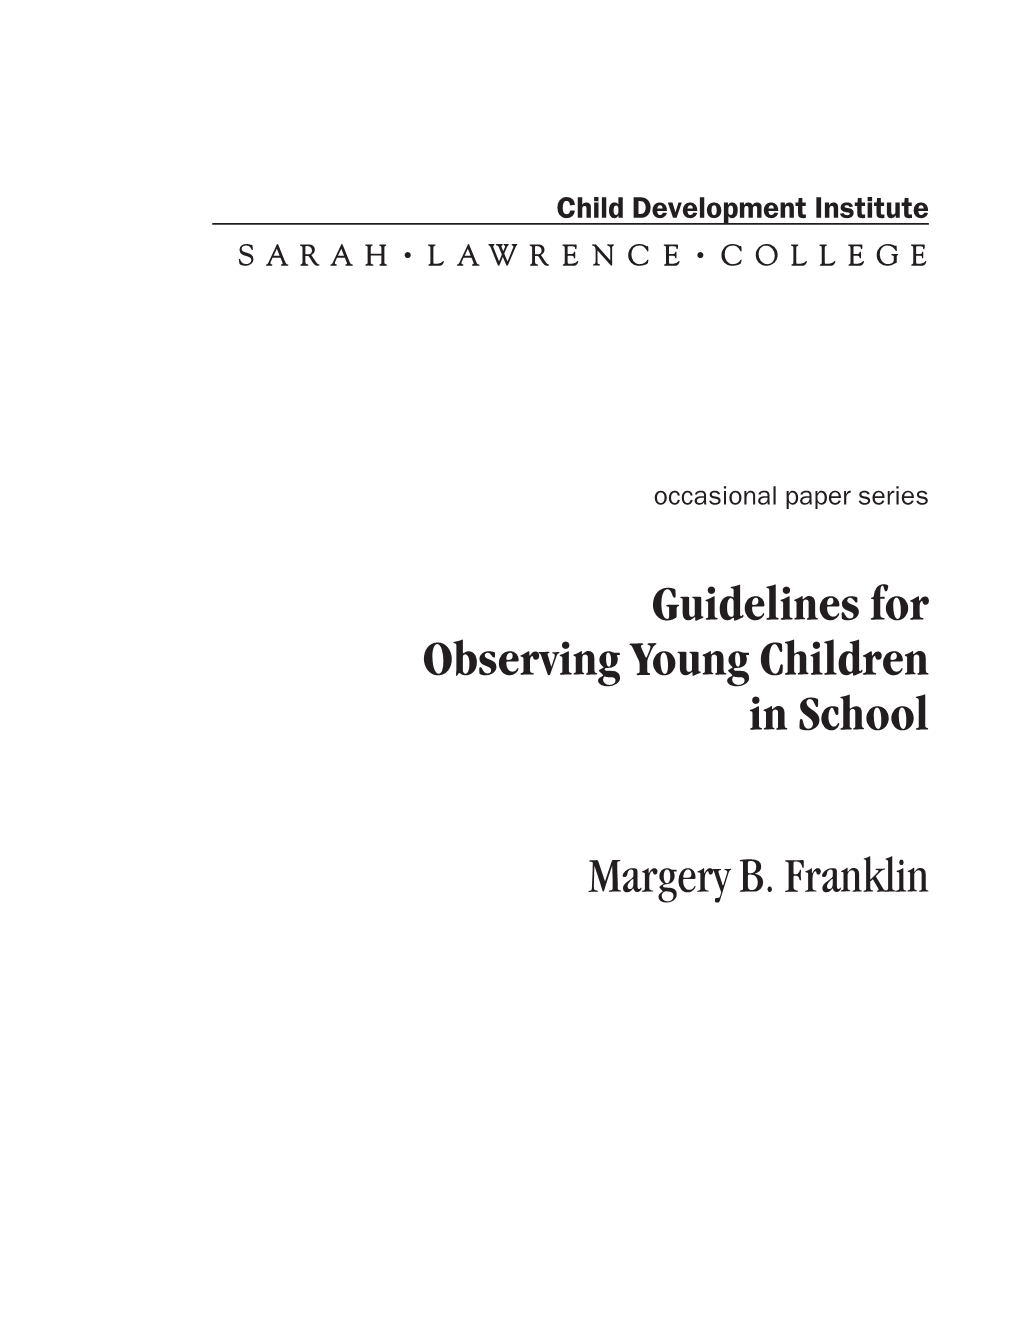 Guidelines for Observing Young Children in School Margery B